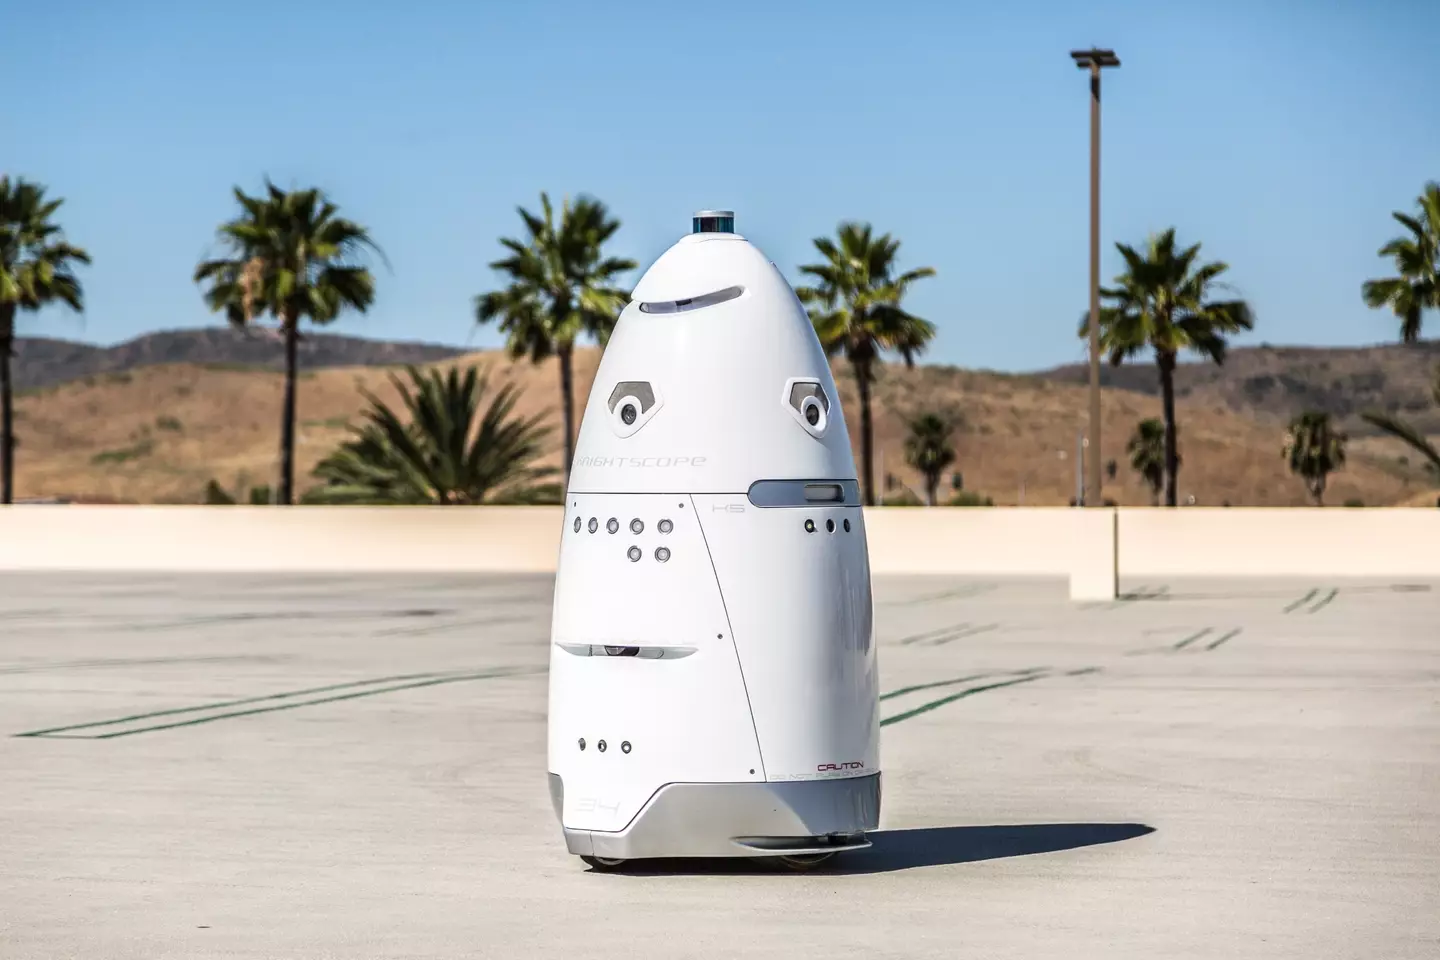 An AI police robot has been tipped to totally change the future of policing in America.